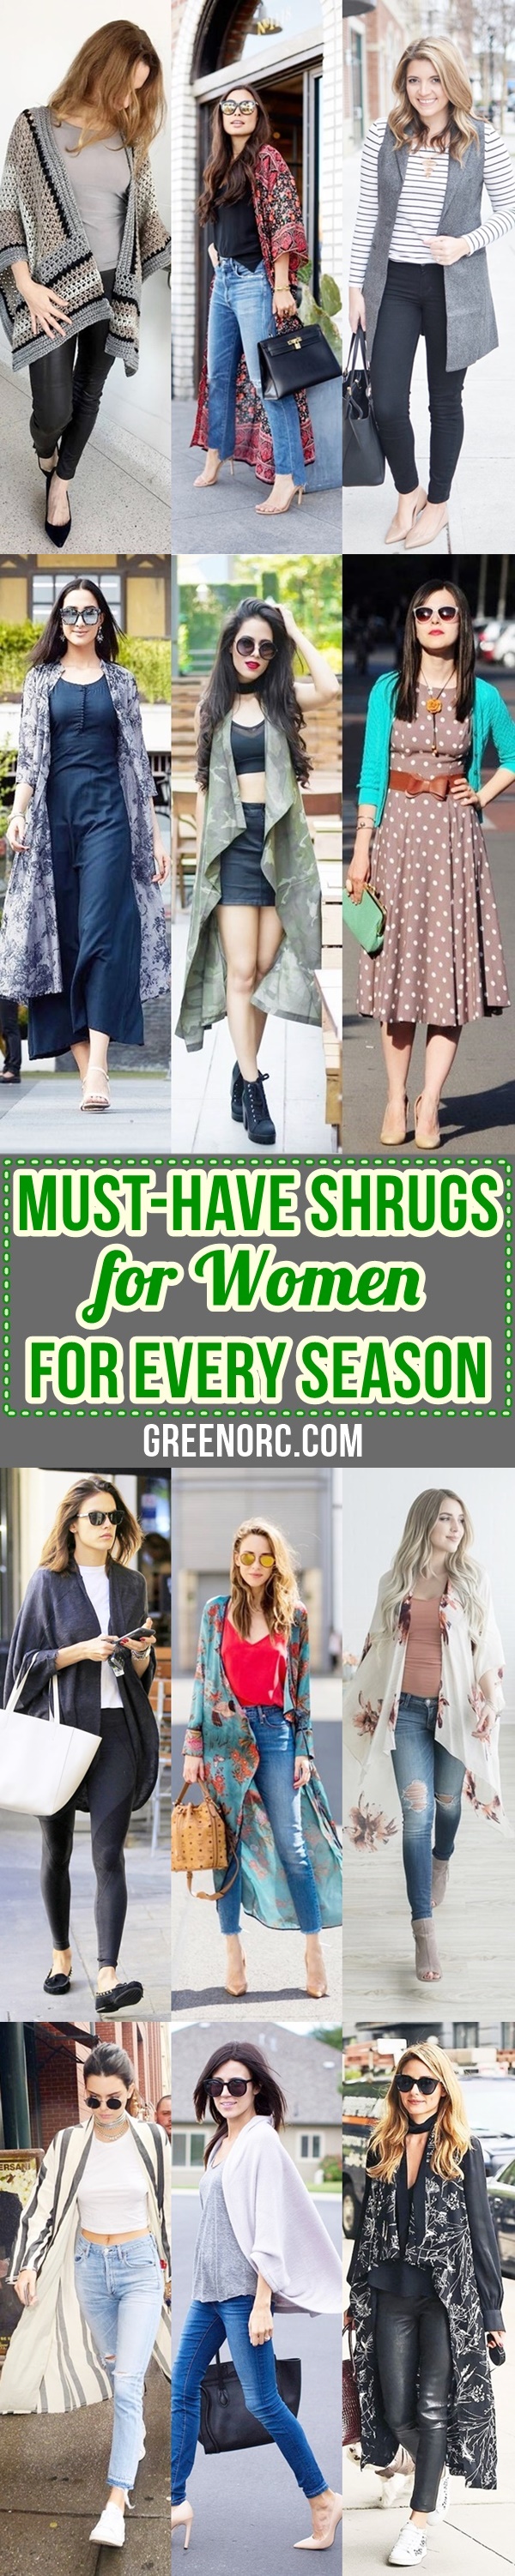 Must-Have shrugs for Women for Every Season